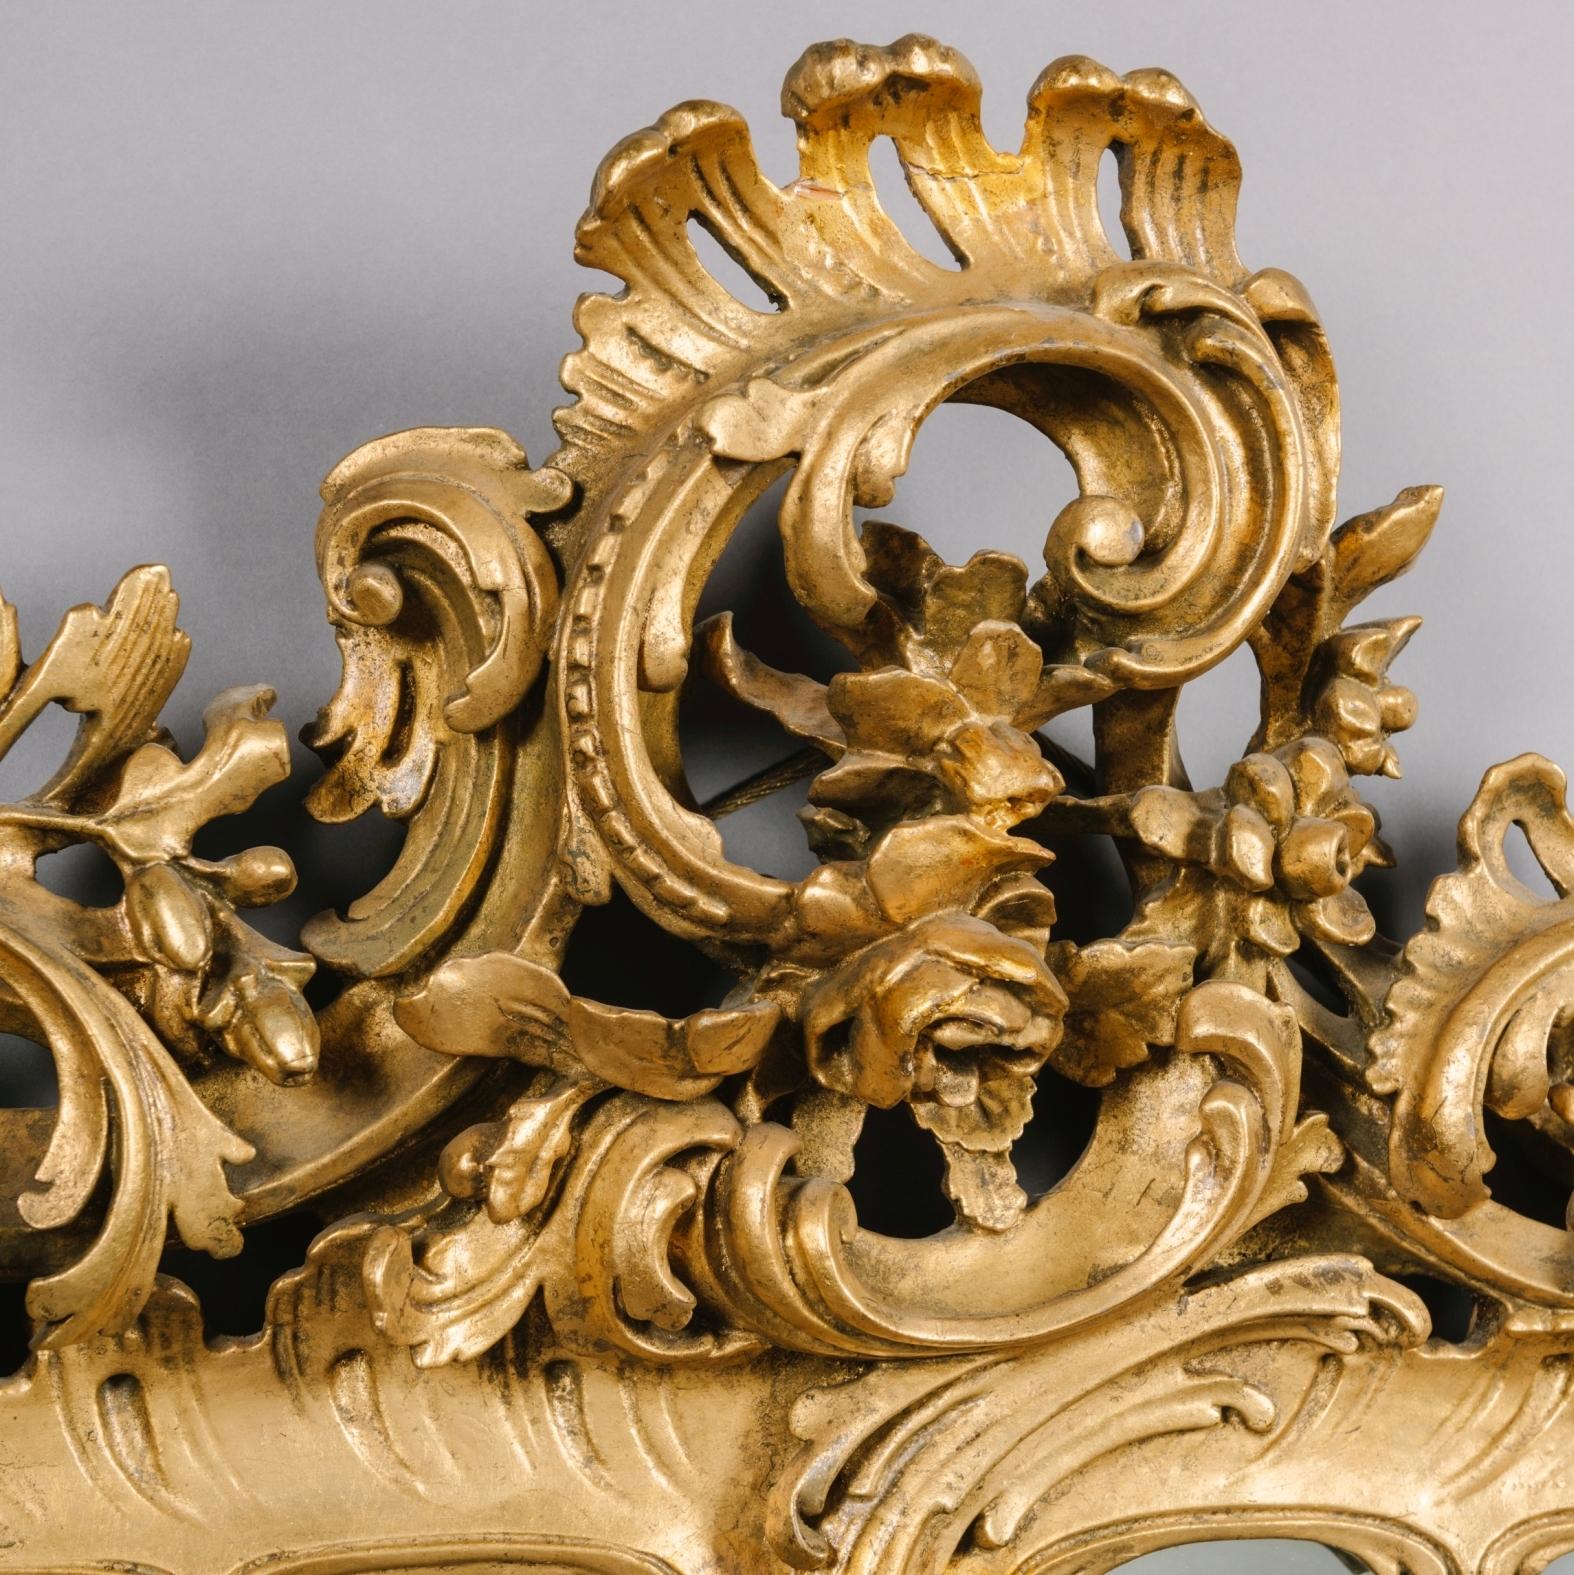 A Fine Pair of George III Style Carved Giltwood Mirrors.

Each mirror has a rectangular bevelled mirror plate within a carved giltwood frame of acanthus and 'C'-scrolls, surmounted by a pierced scrolling cresting of acanthus, oak leaves and flowers.